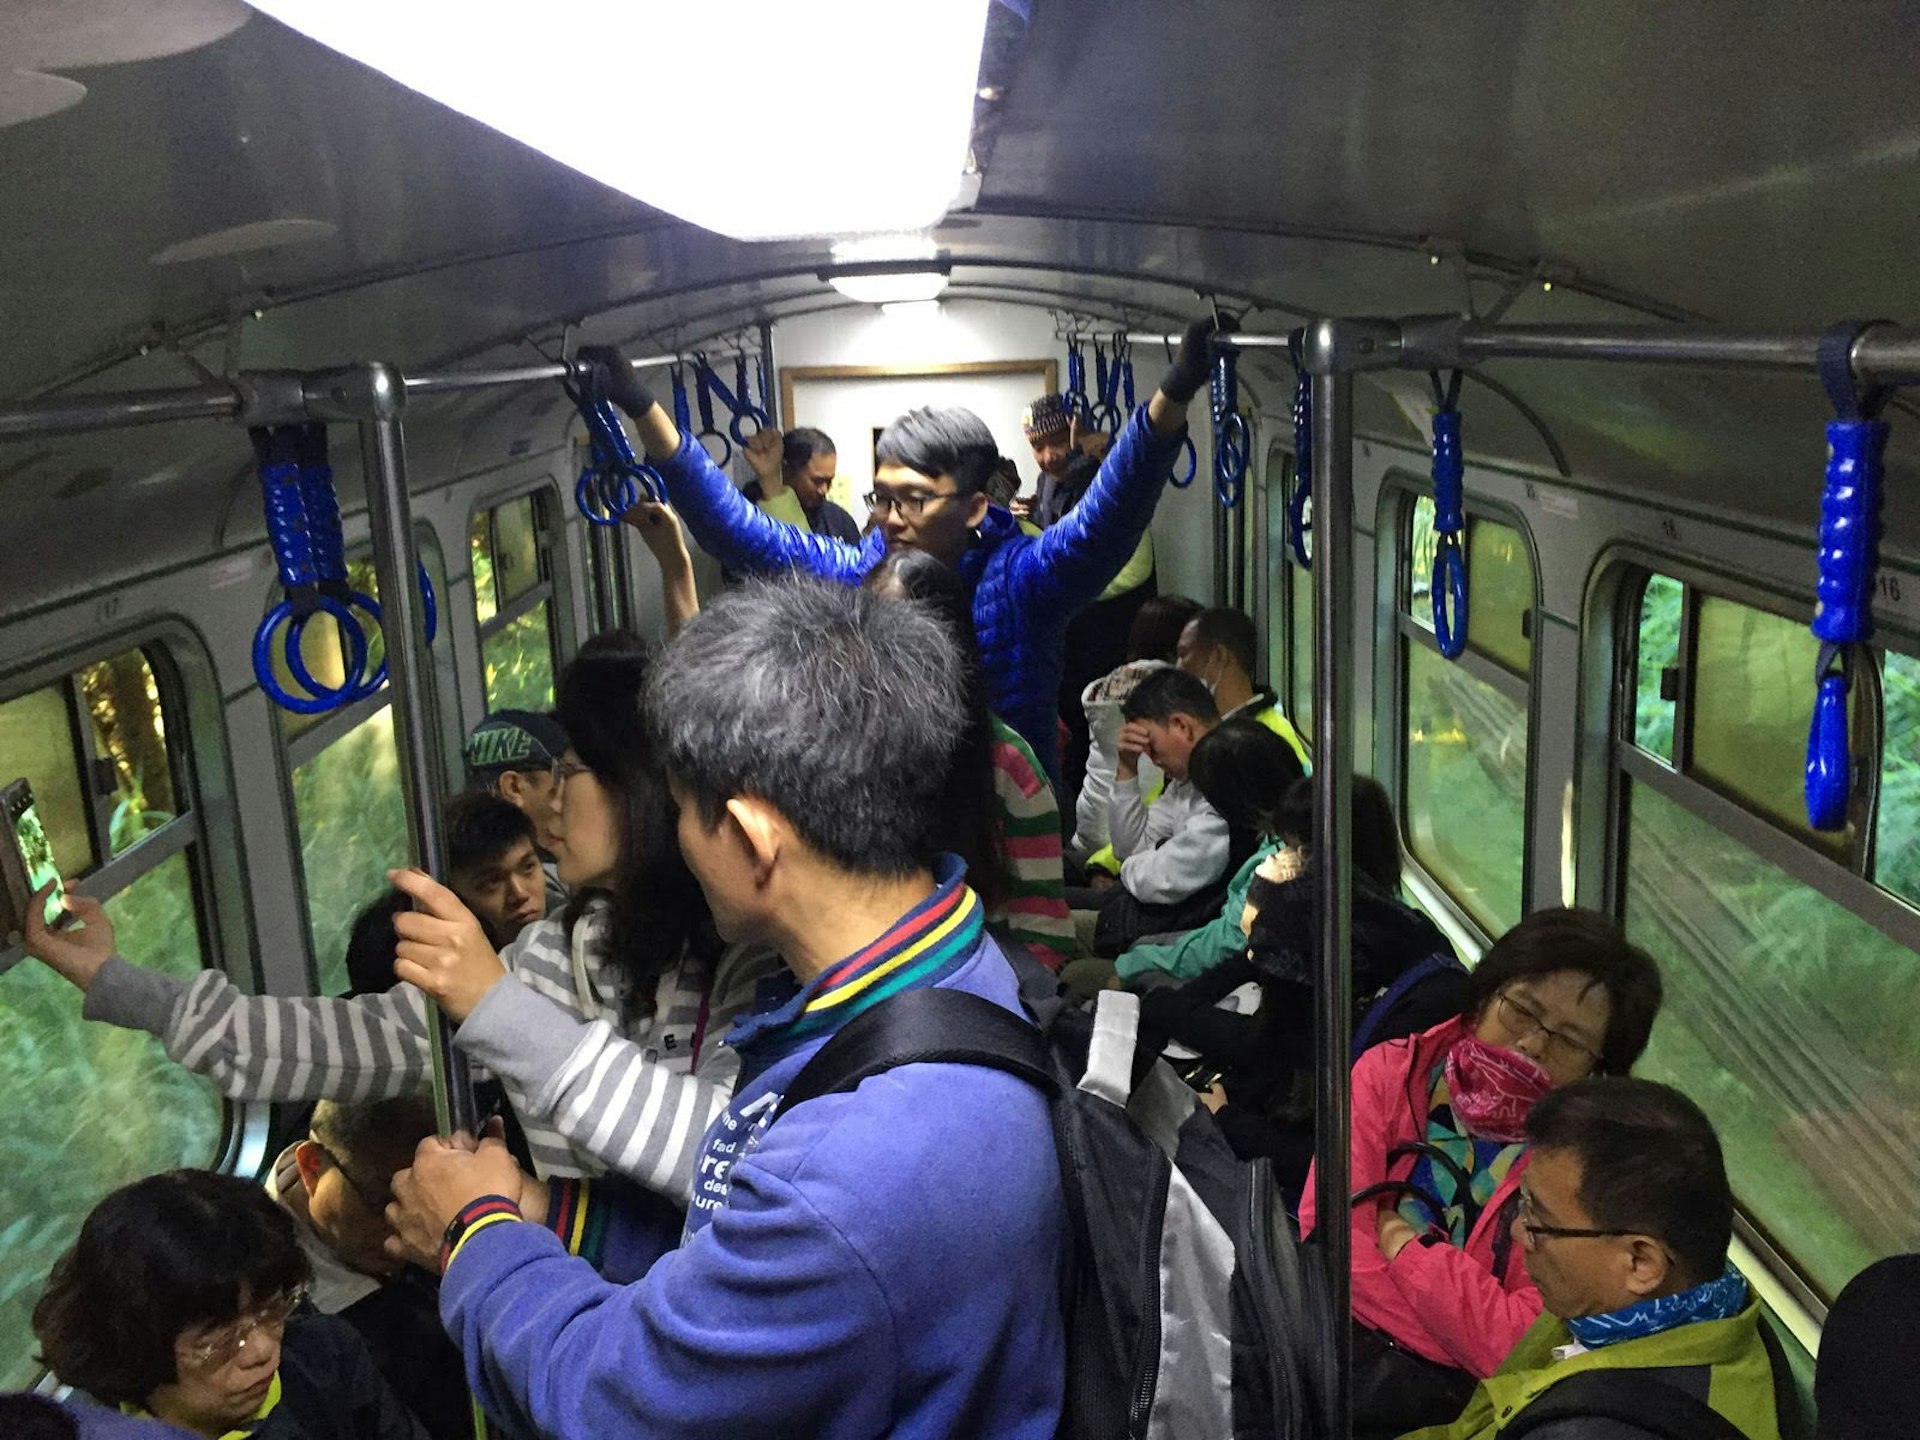 Visitors seated and standing, packed into a train carriage, some holding on to the railings. 